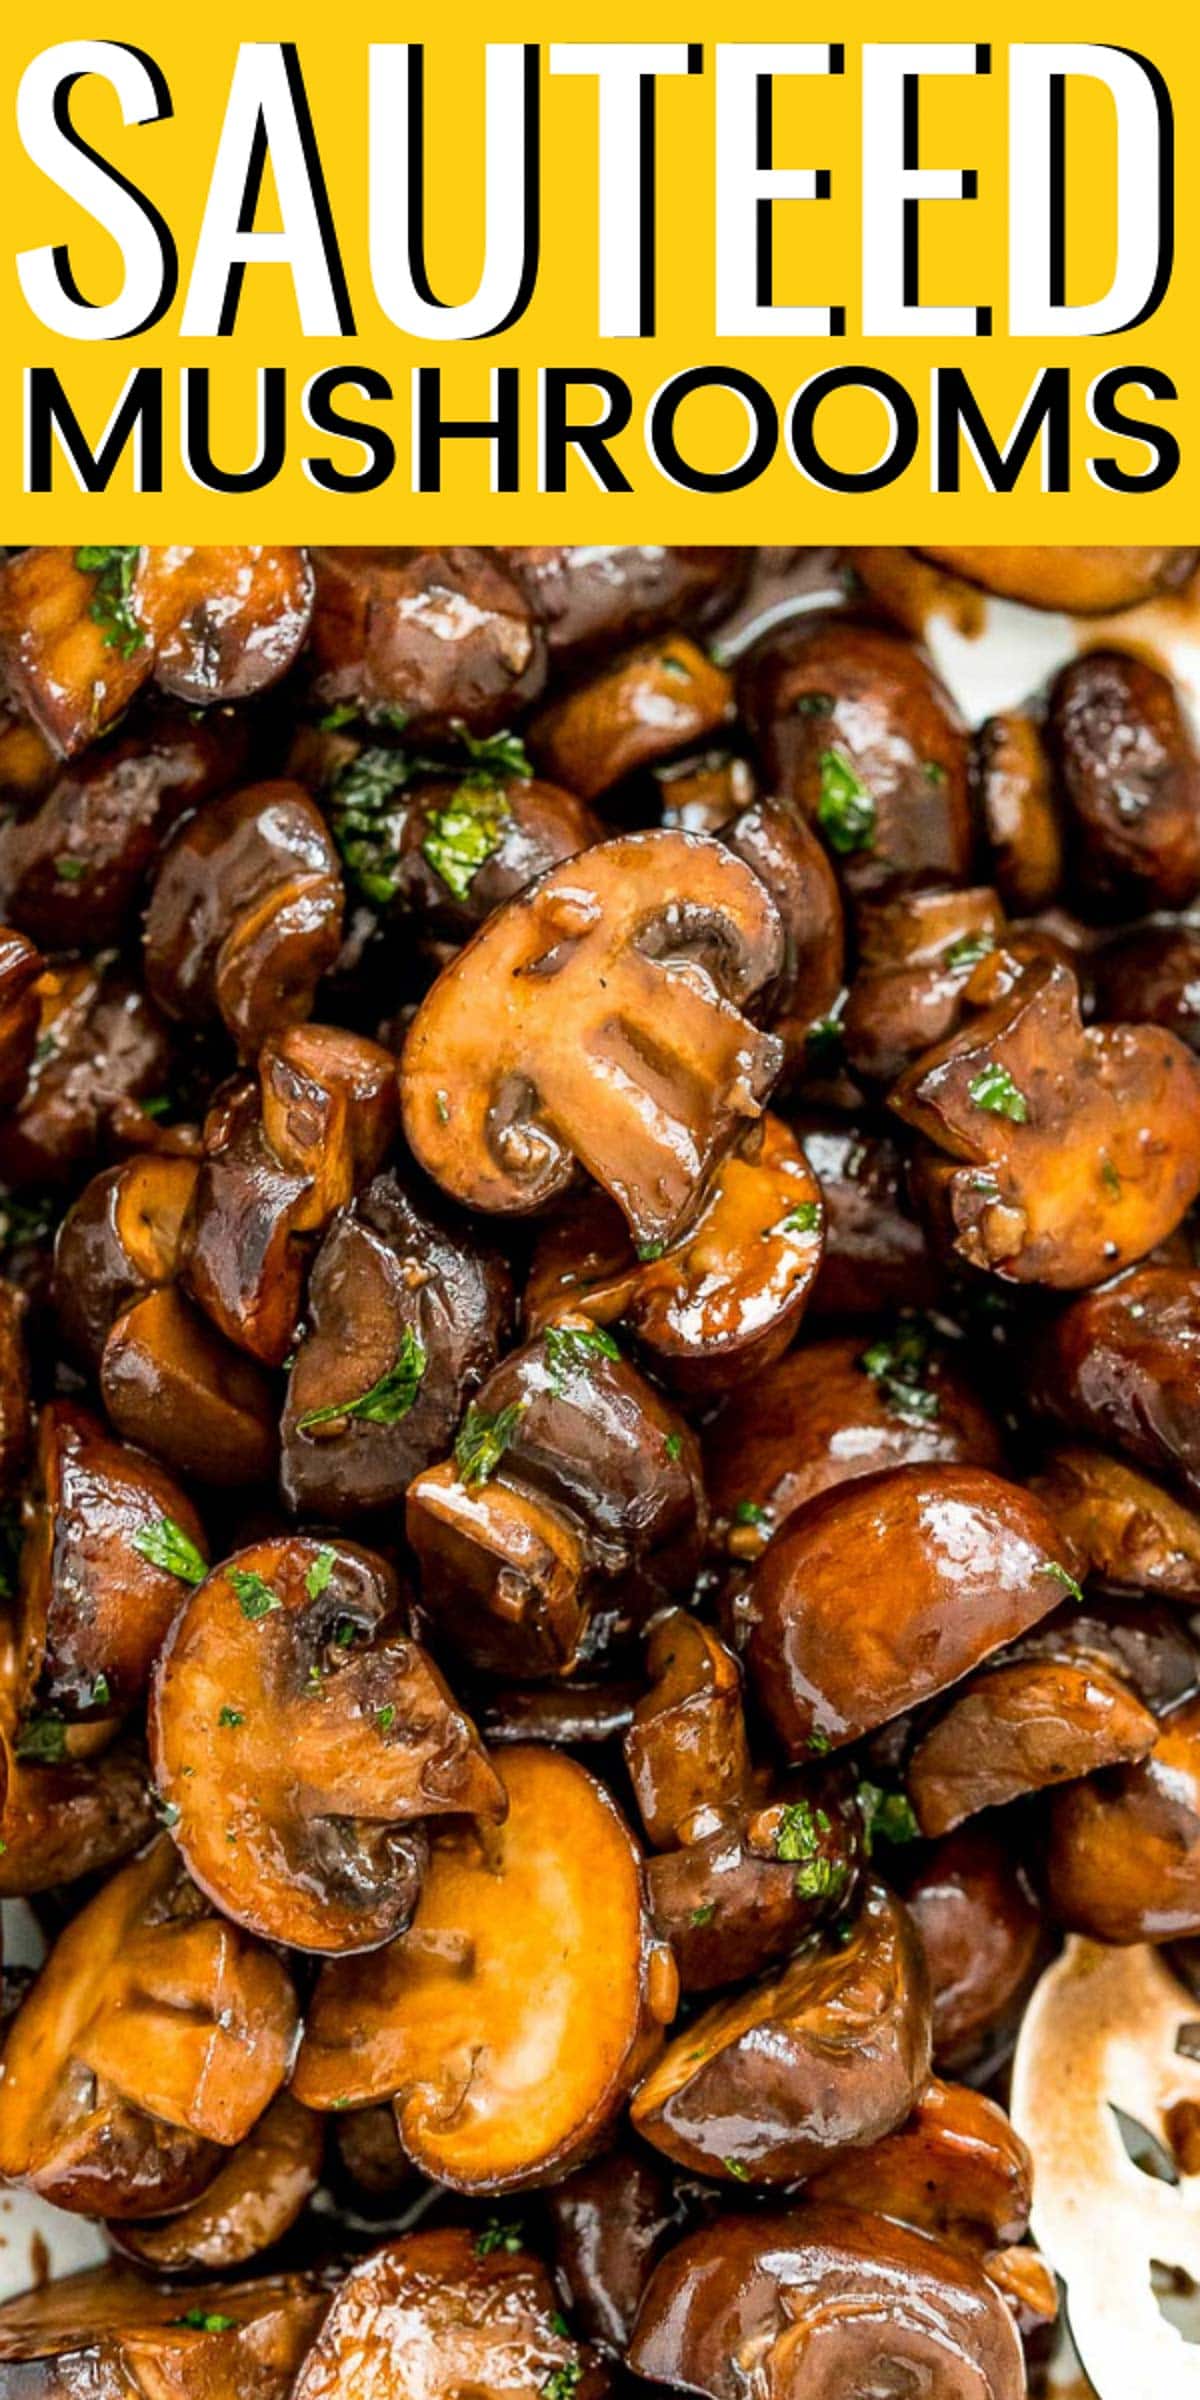 Sauteed Mushrooms are so easy to make! They are browned in butter and olive oil and seasoned with garlic and salt. A glaze made of balsamic, brown sugar, and black pepper make this side dish a total crowd-pleaser.   via @sugarandsoulco